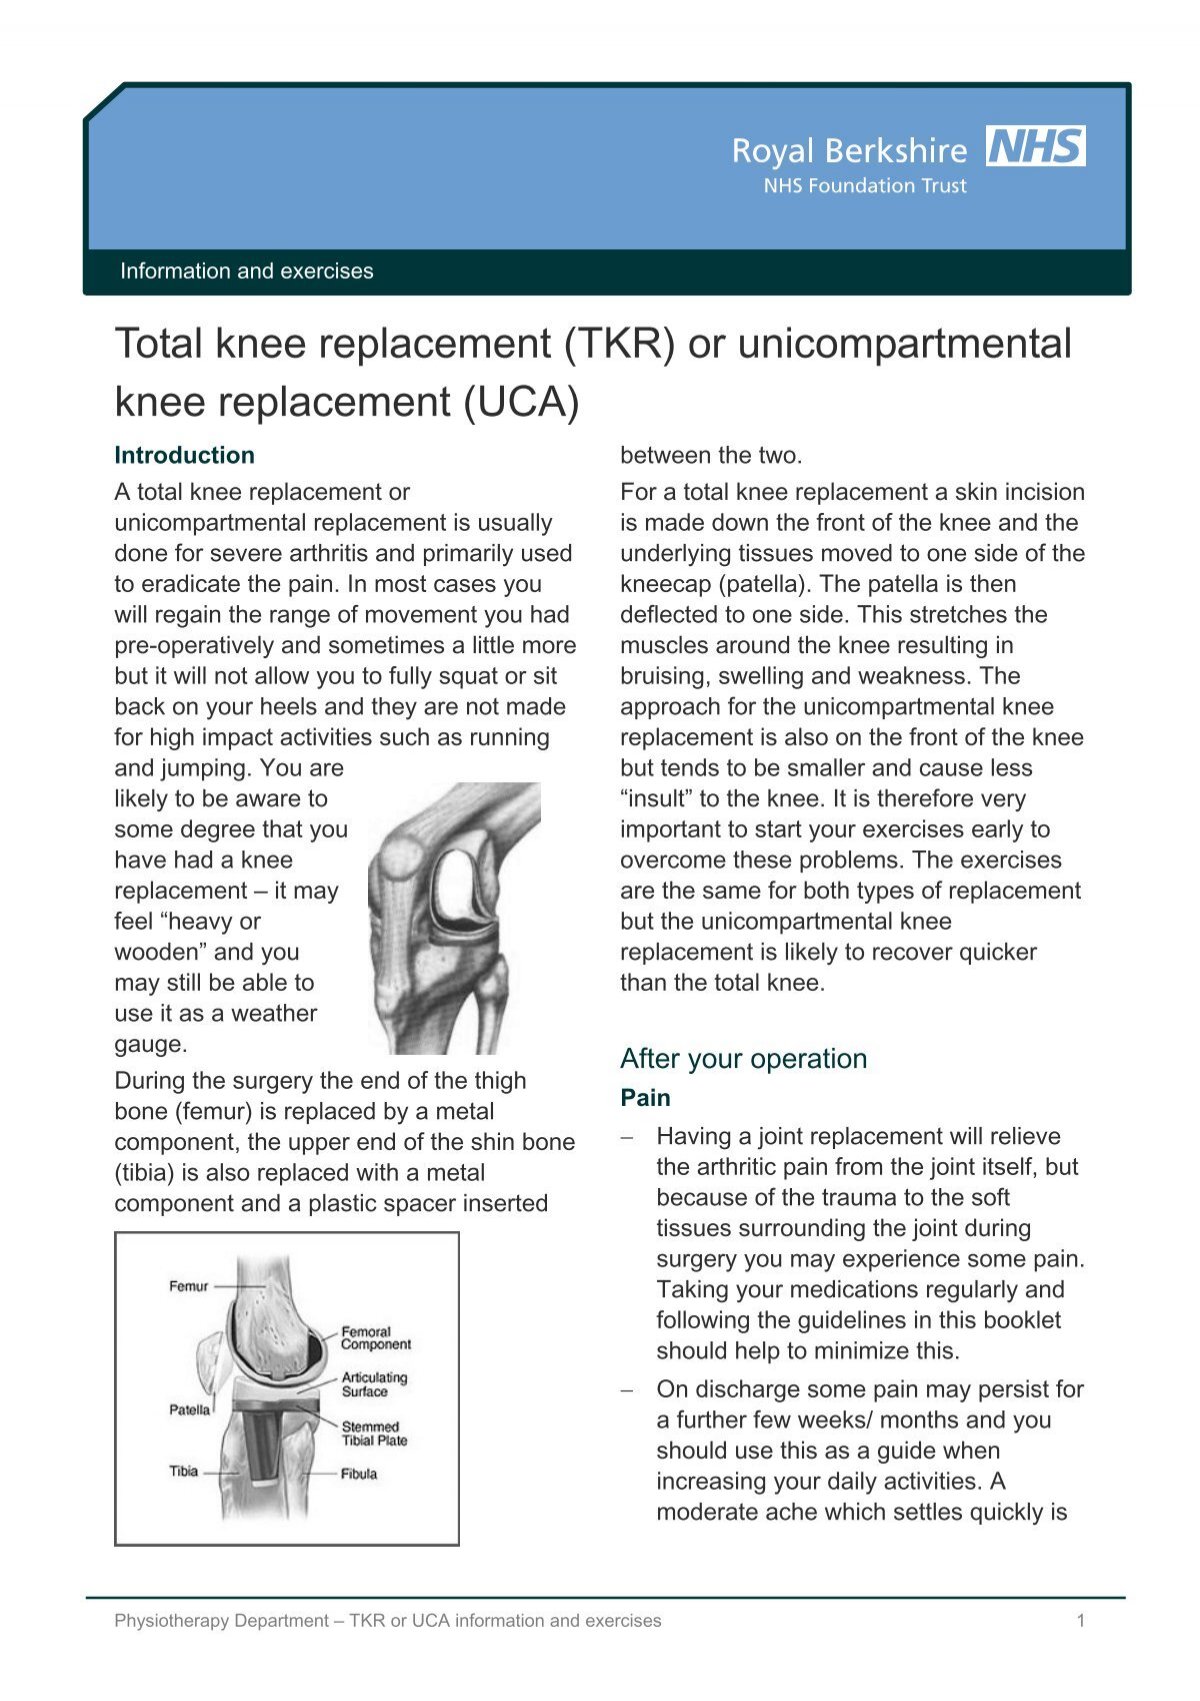 (TKR) or unicompartmental knee replacement - The Royal Berkshire